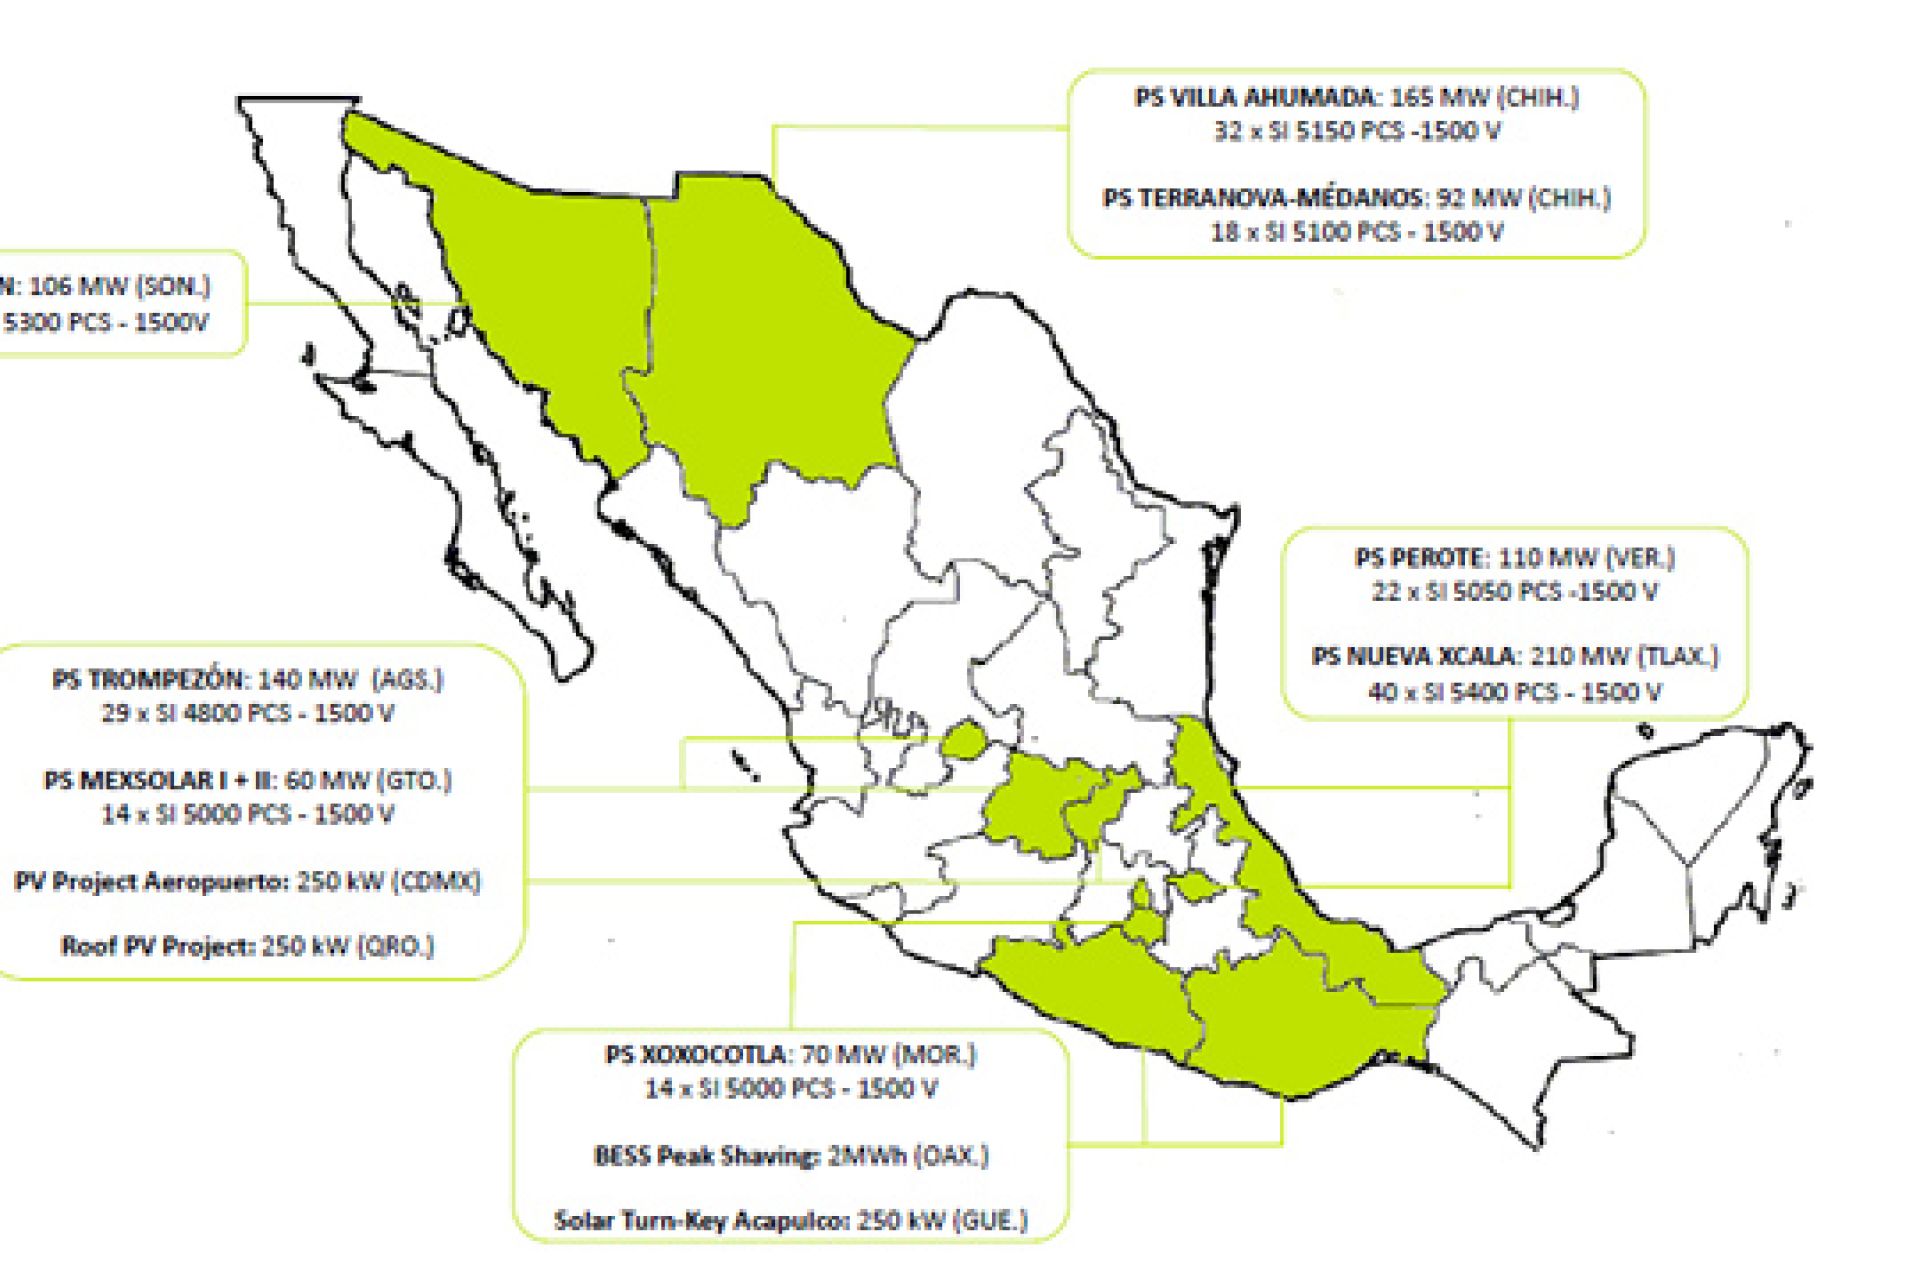 Jema energy awarded 210 MW in a new project in Mexico